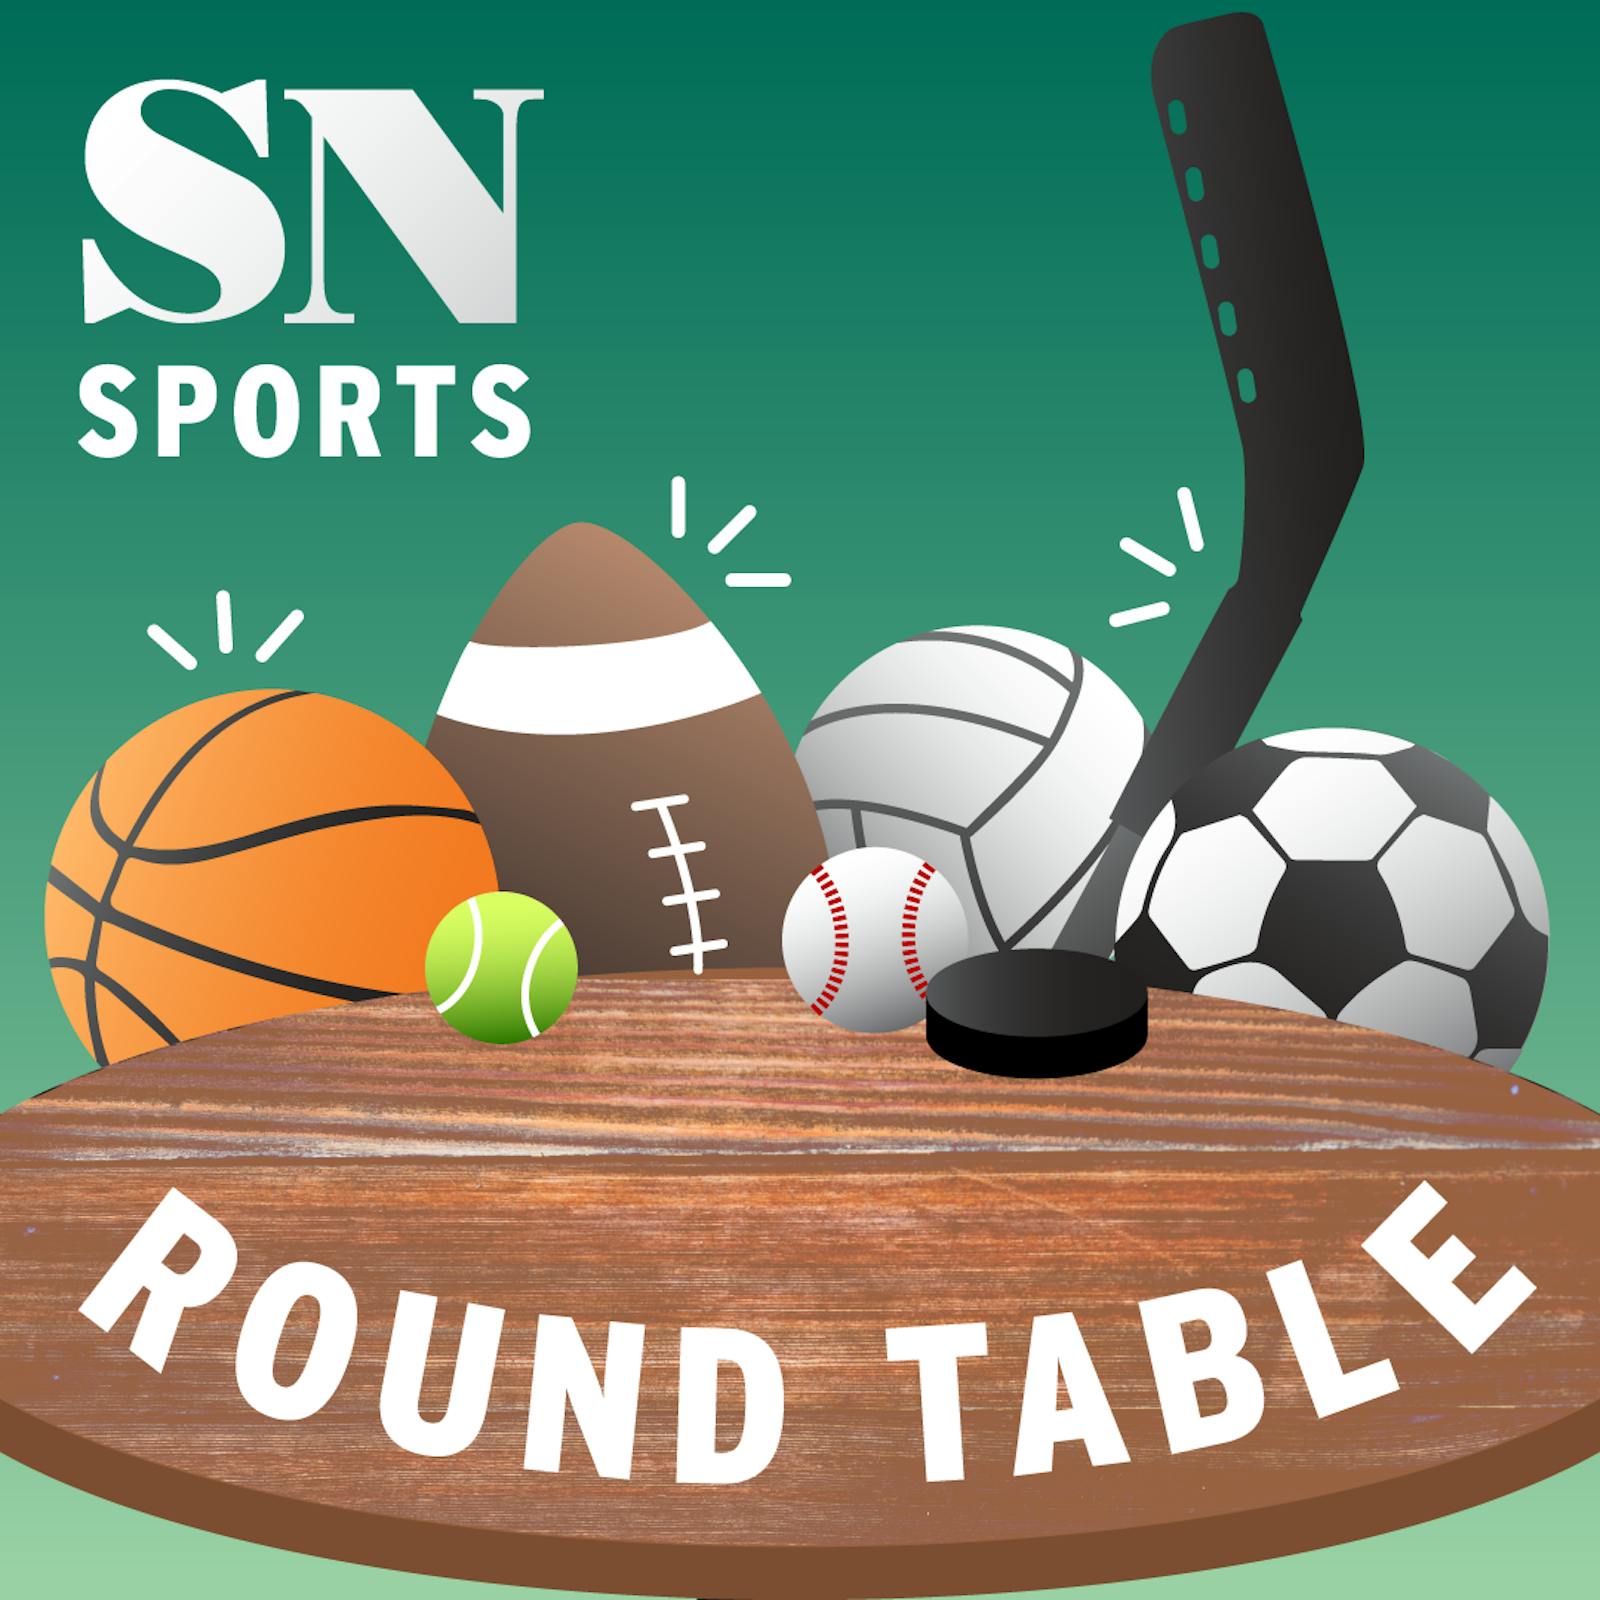 The Trivia Championship: A Sports Roundtable Event